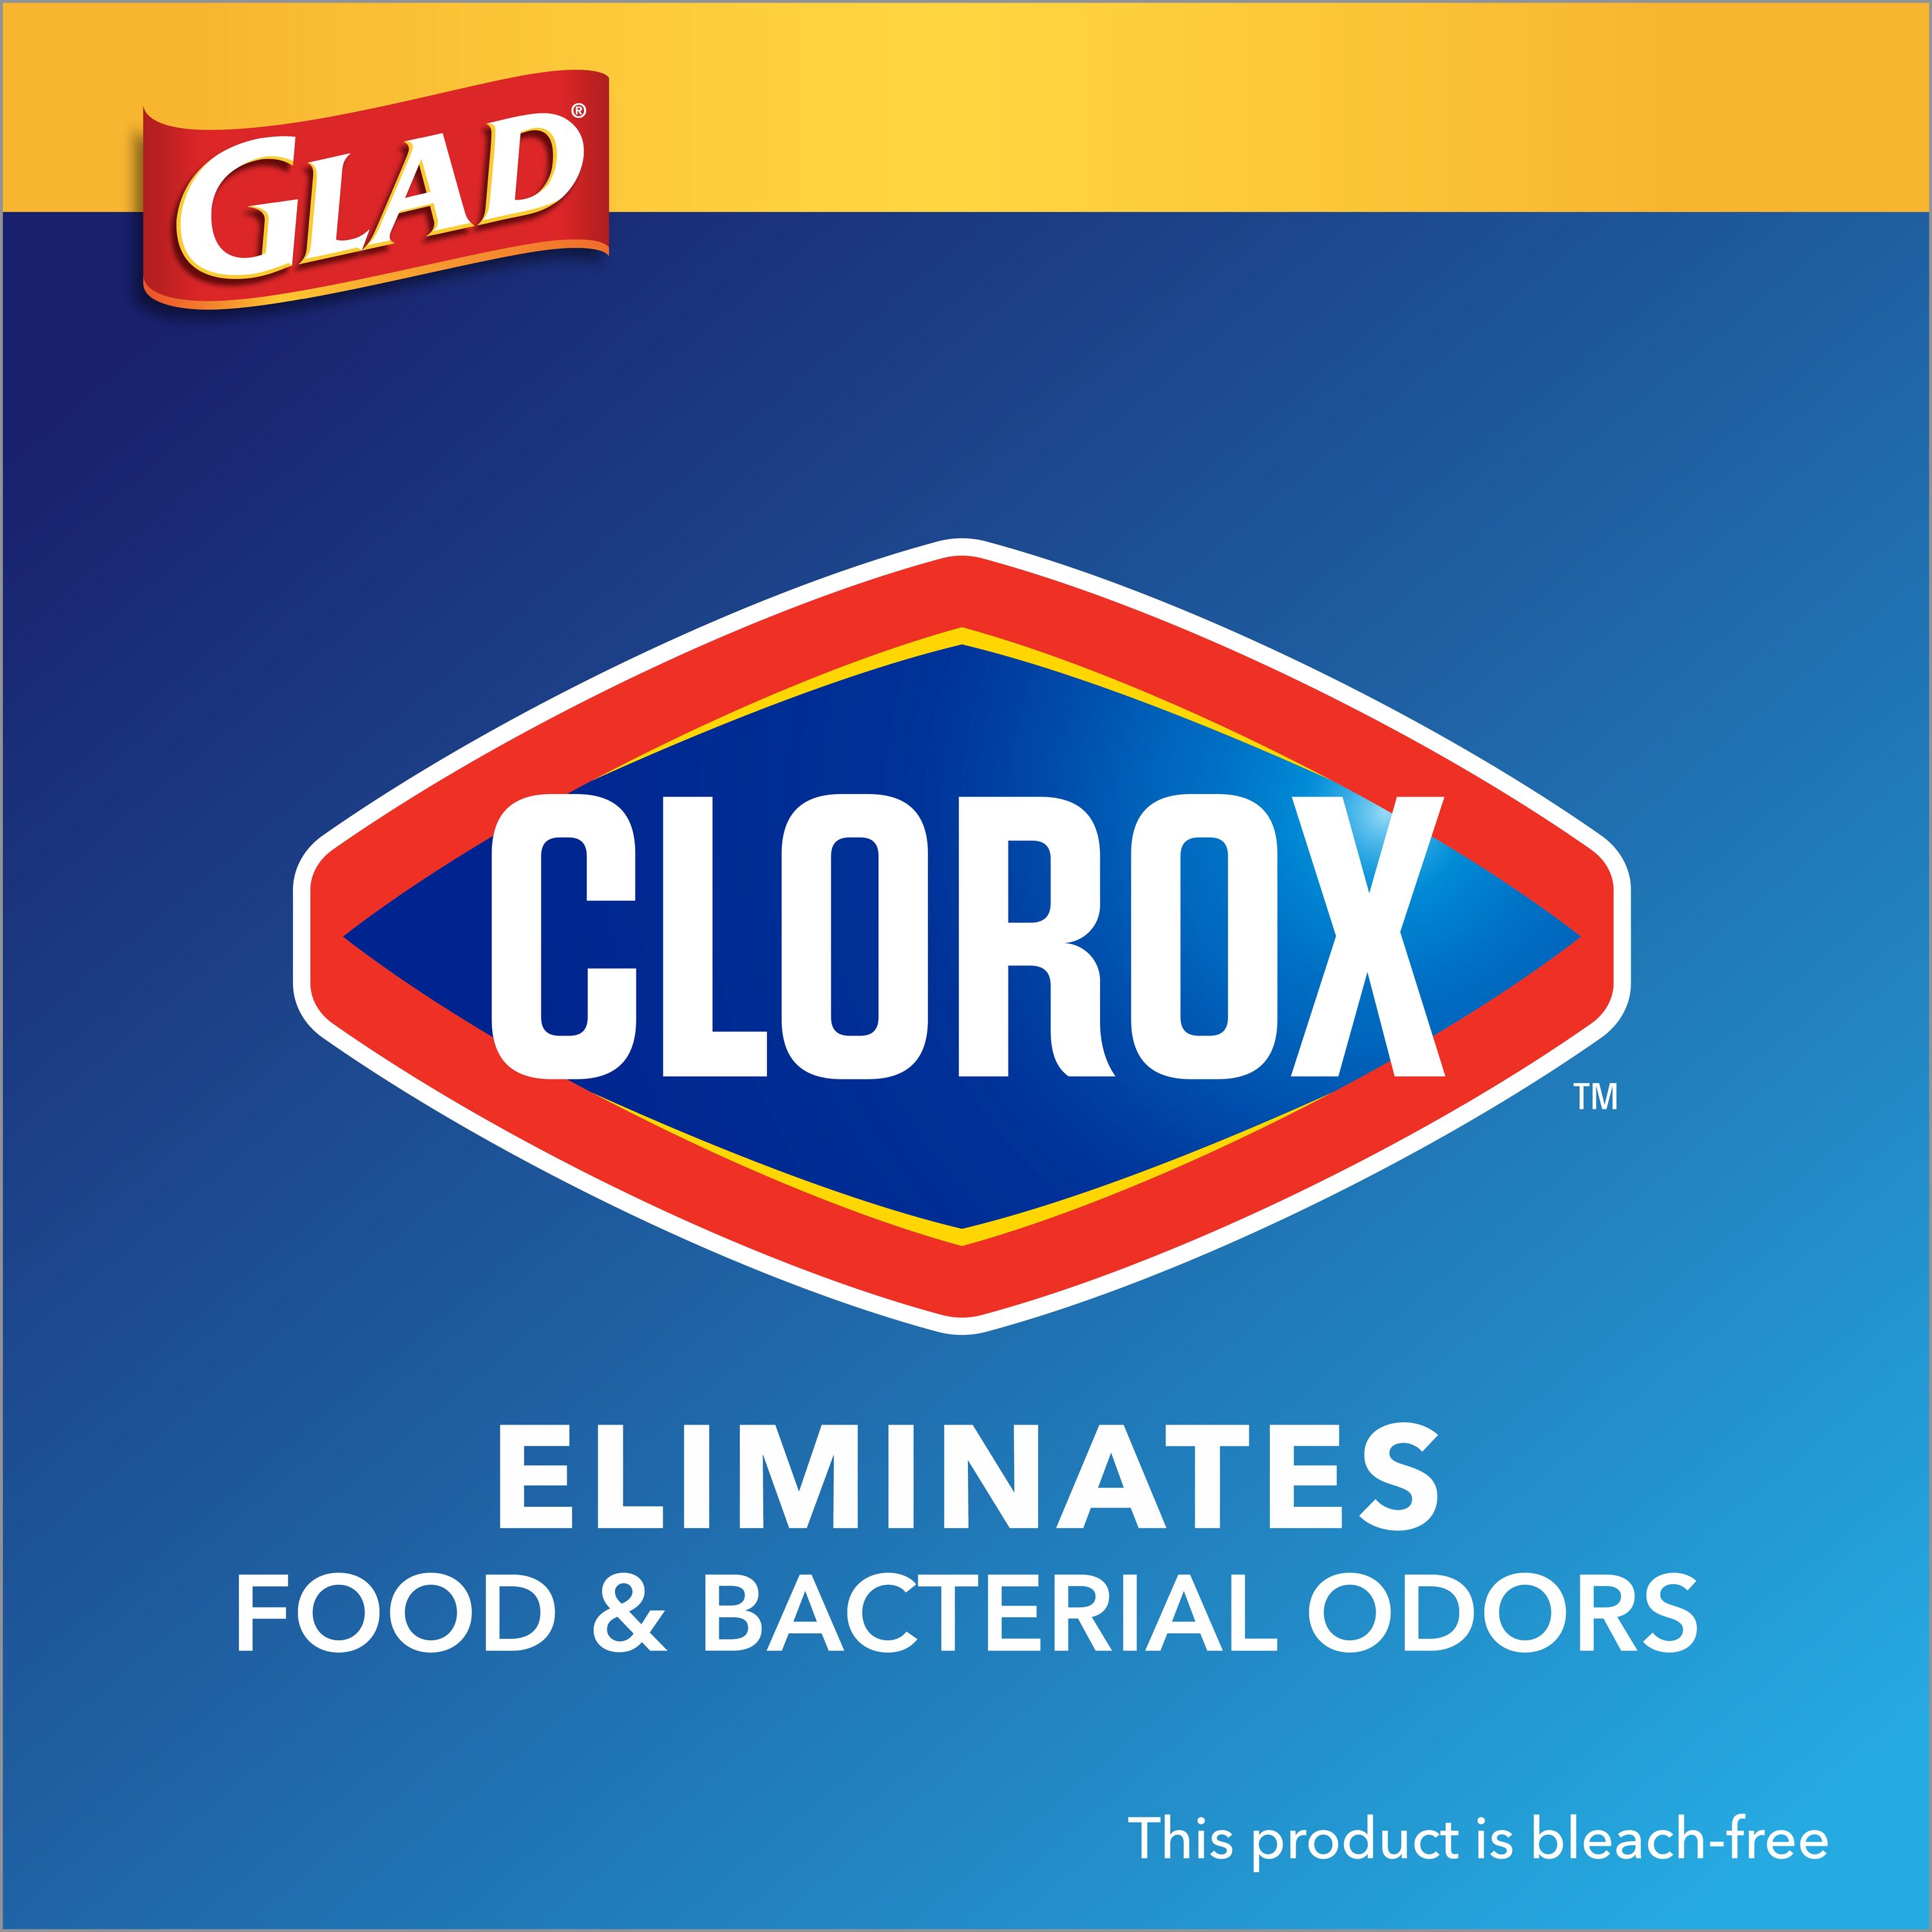 Glad ForceFlexPlus with Clorox Trash Bags, Eucalyptus, and Peppermint, 120  ct./13 gal.